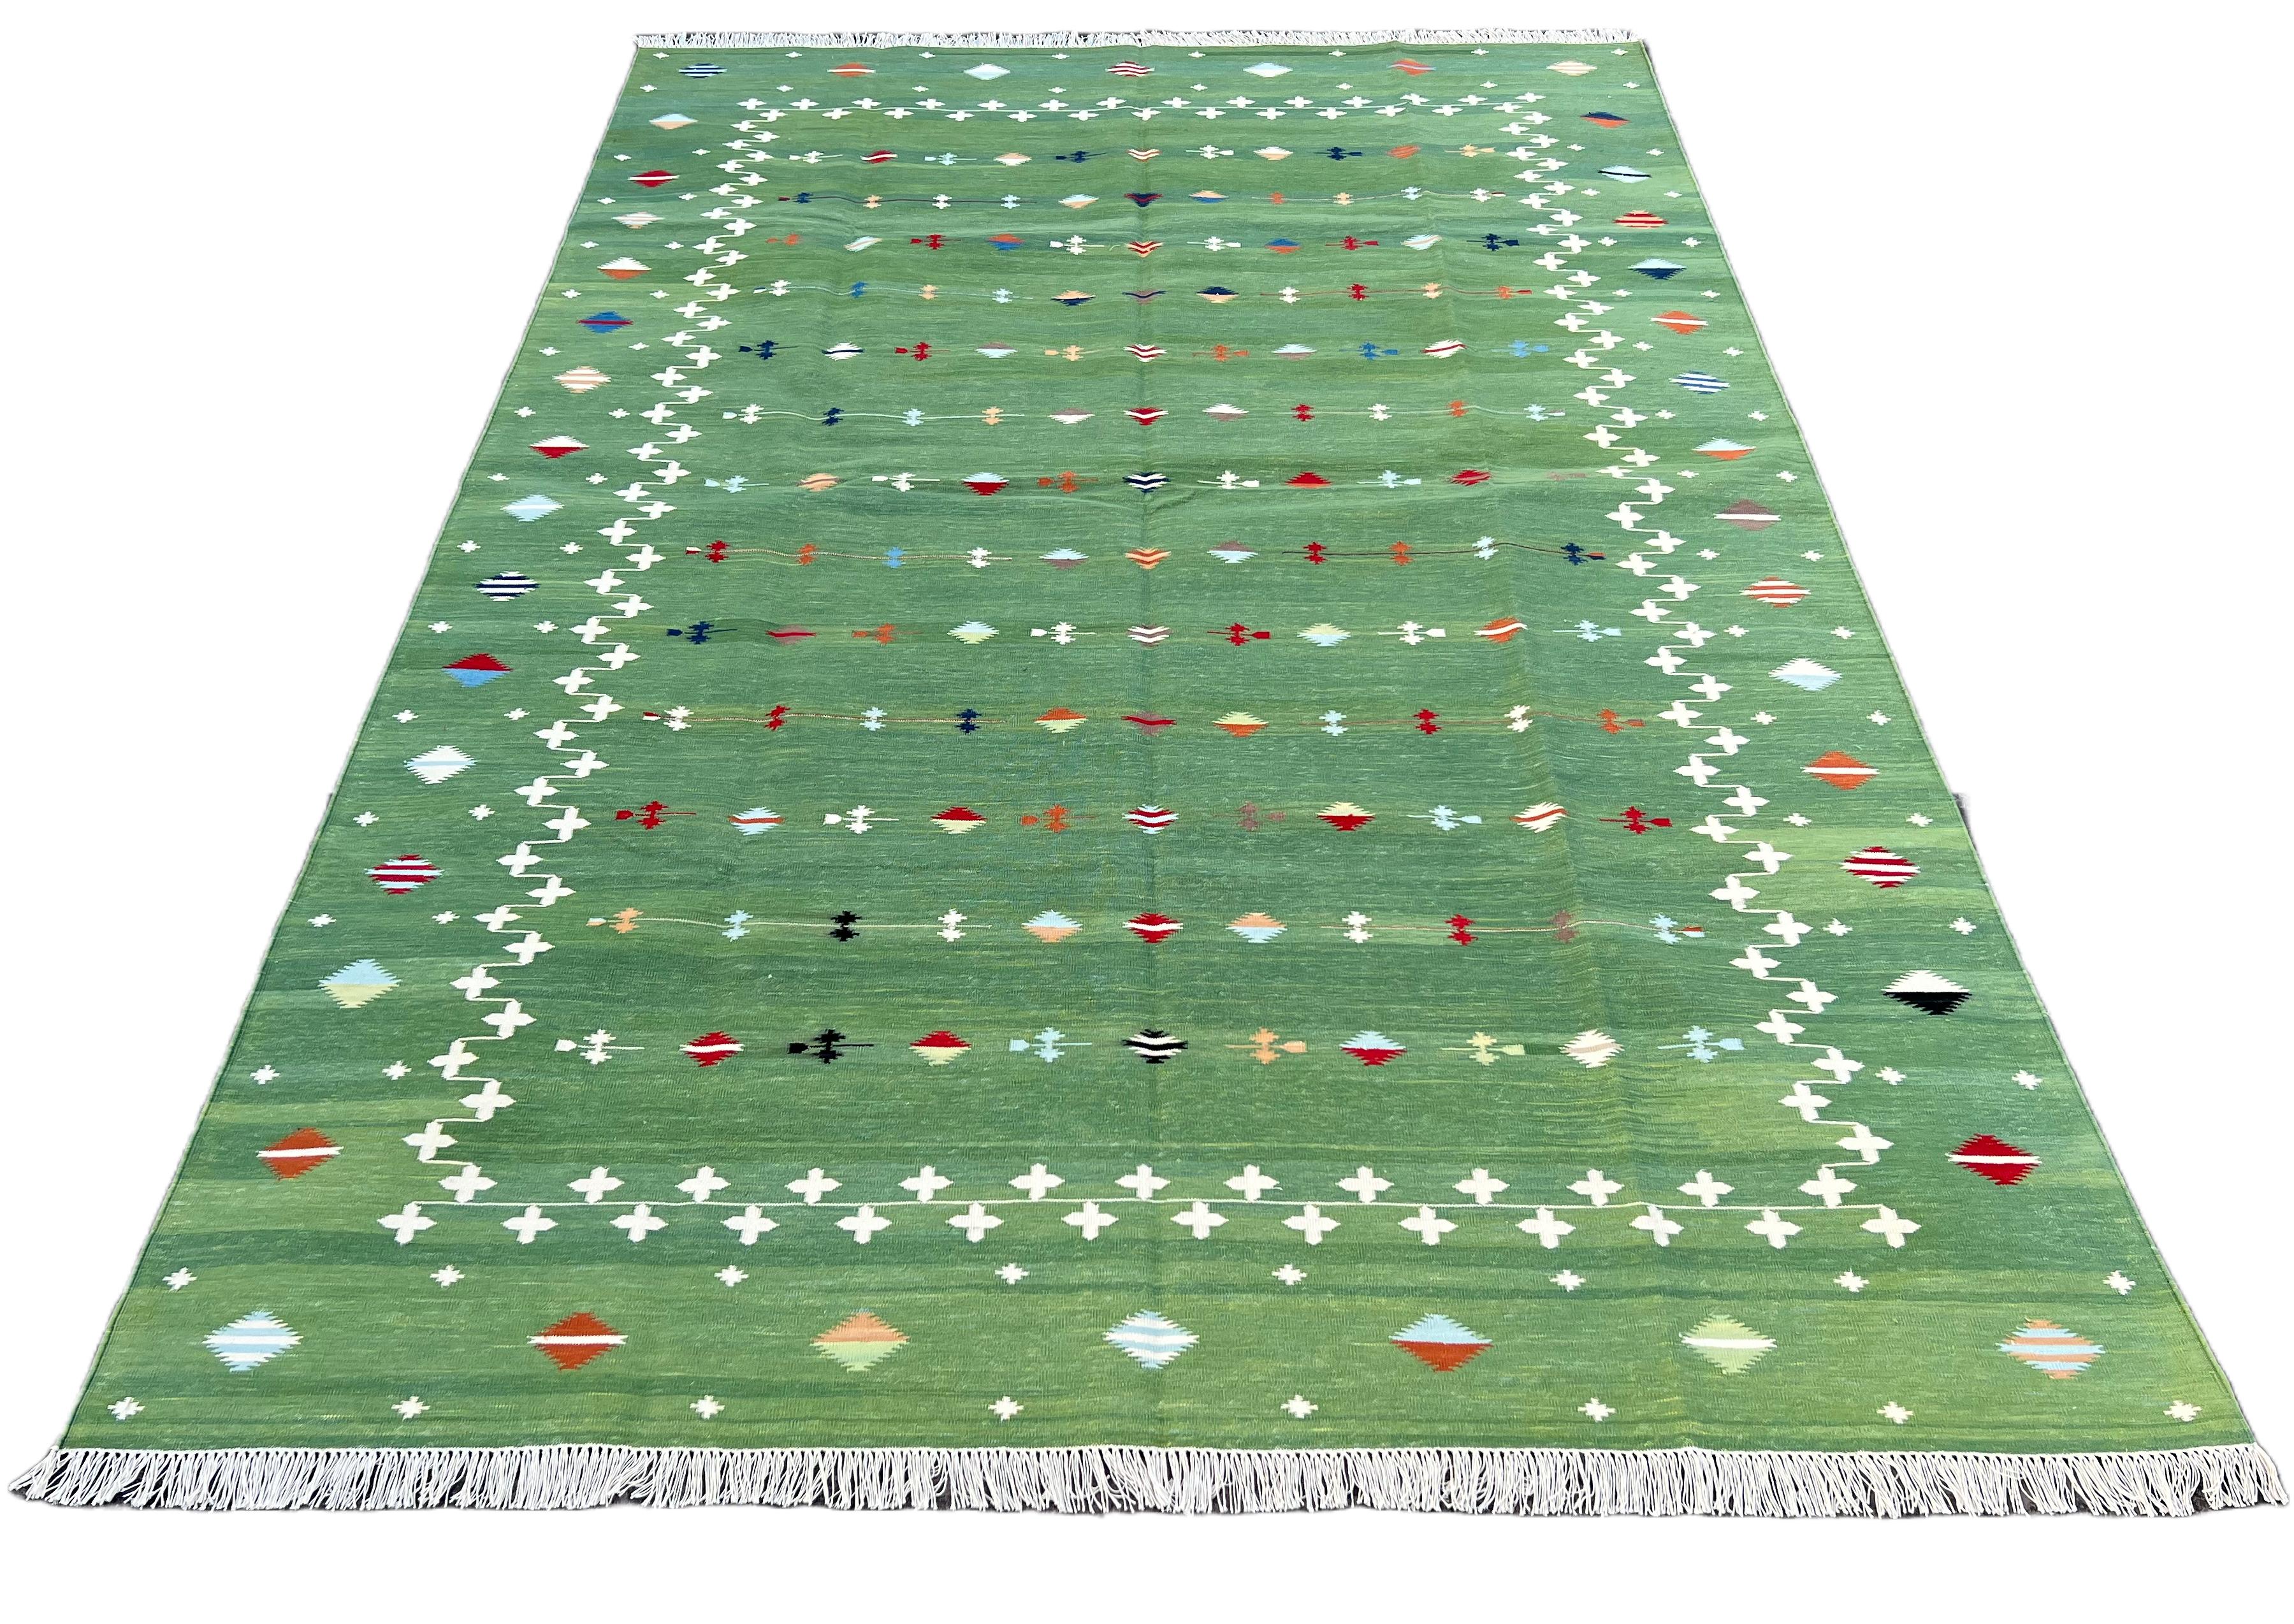 Hand-Woven Handmade Cotton Area Flat Weave Rug, 5x7 Green And White Shooting Star Dhurrie For Sale